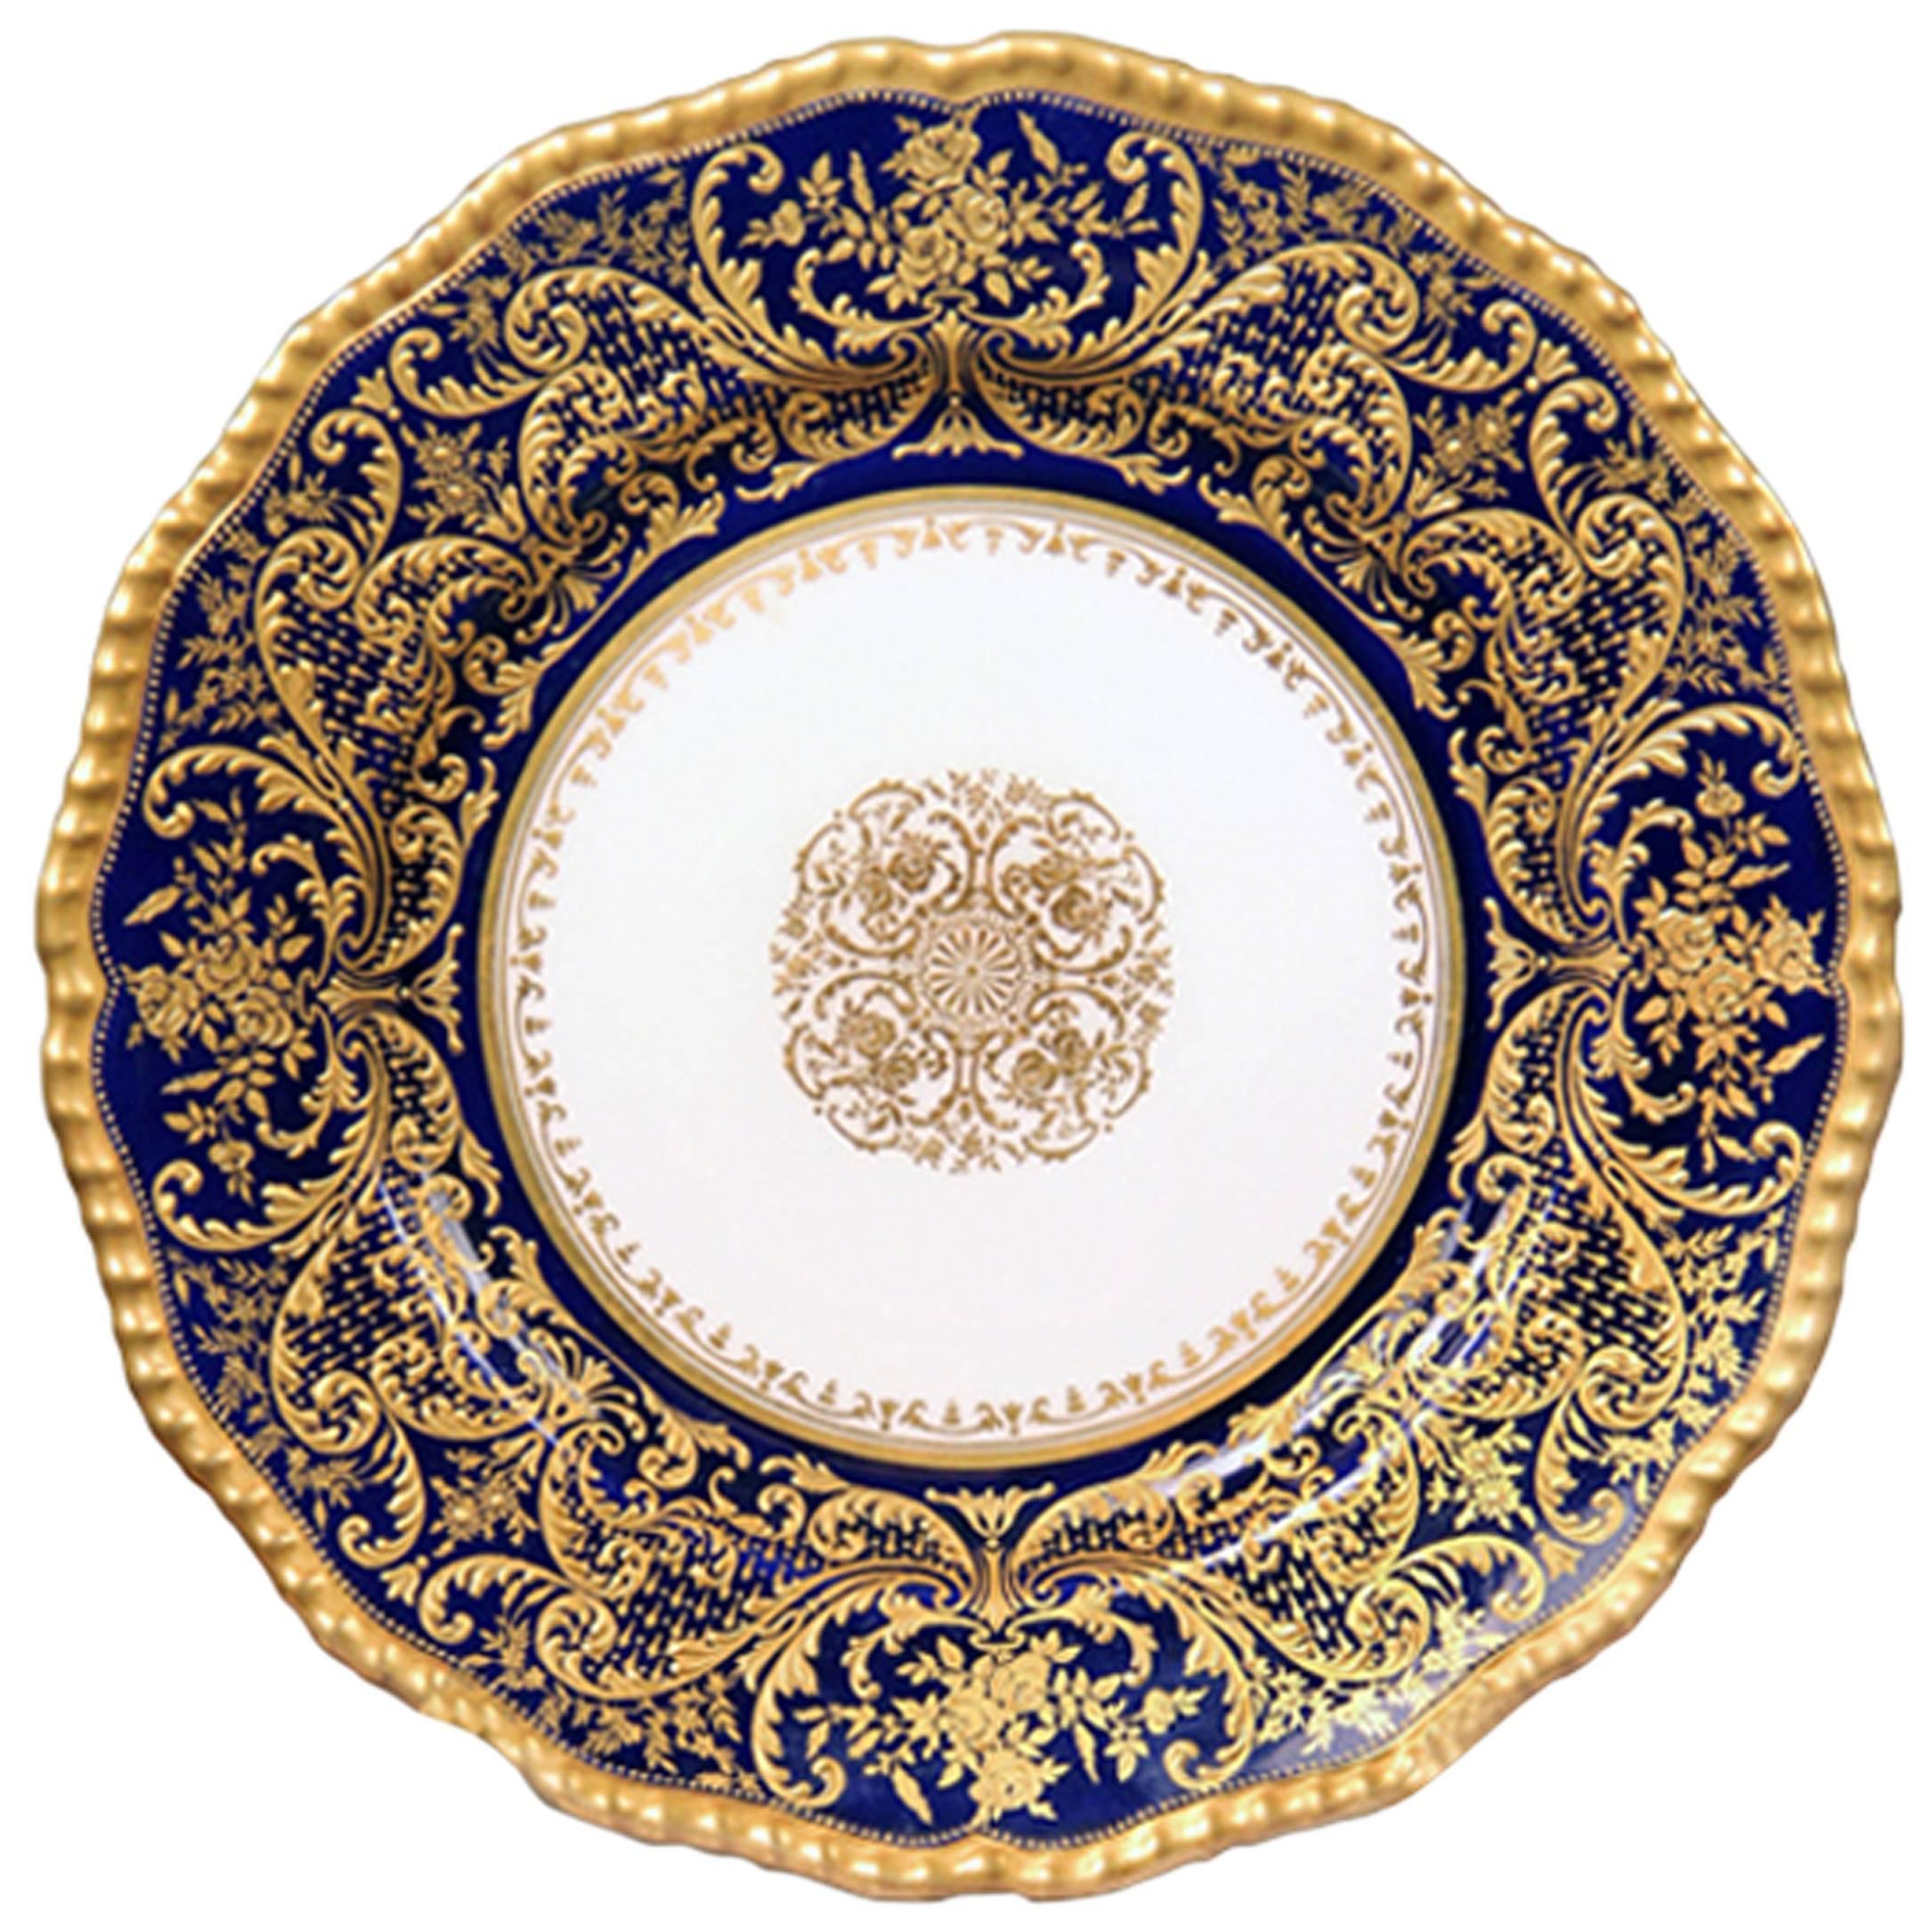 A fantastic quality set of 12, early 20th century English Doulton plates.

Very finely decorated with raised gold flowers and designs.

Stamped Doulton Burslem England, Gilman Collamore and Co New York on the back of the plates.